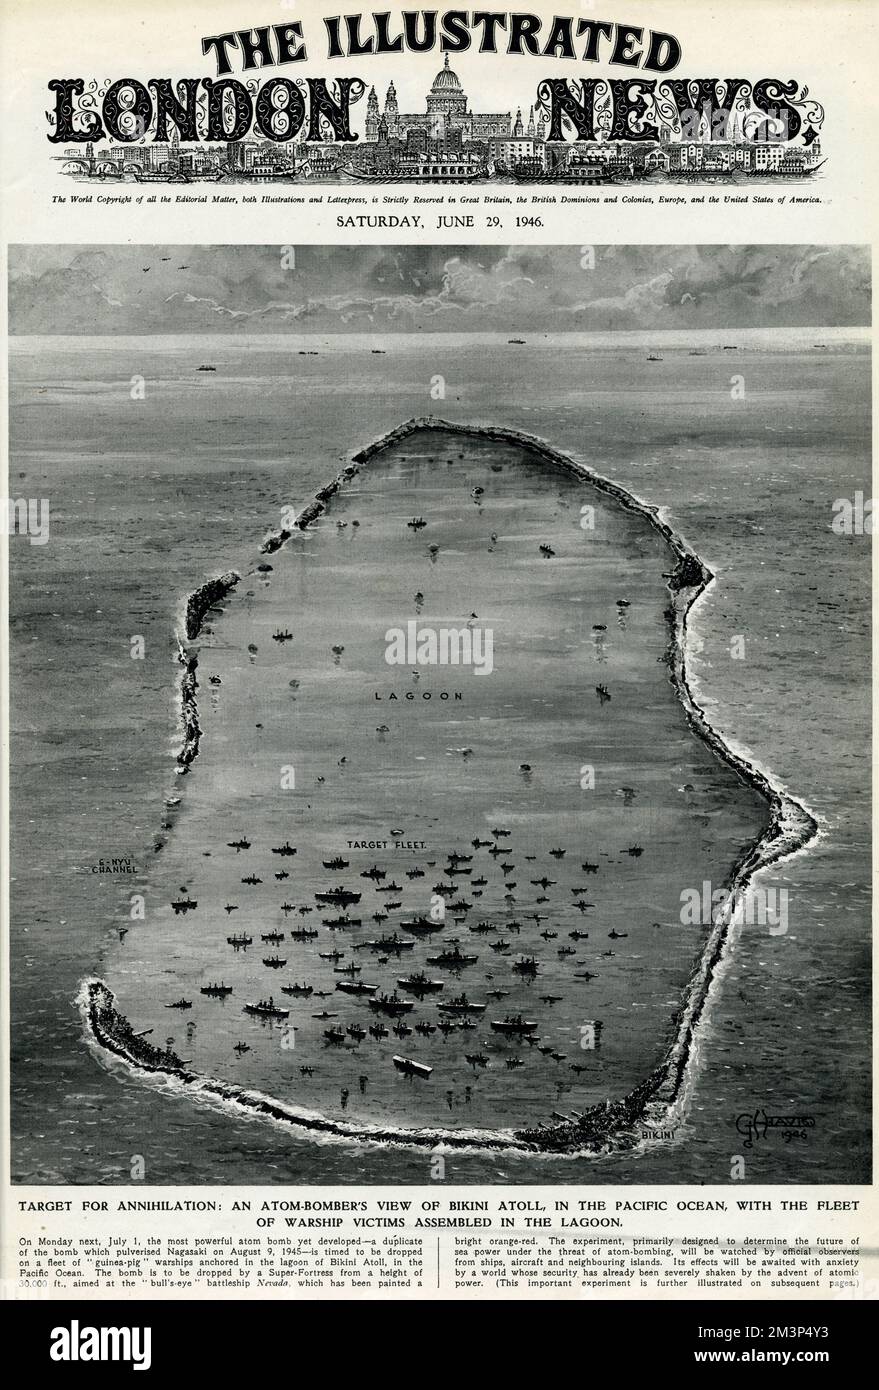 Target for annihilation: an atom bomber's view of Bikini Atoll, in the Pacific Ocean, with the fleet of warship victims assembled in the lagoon. Stock Photo